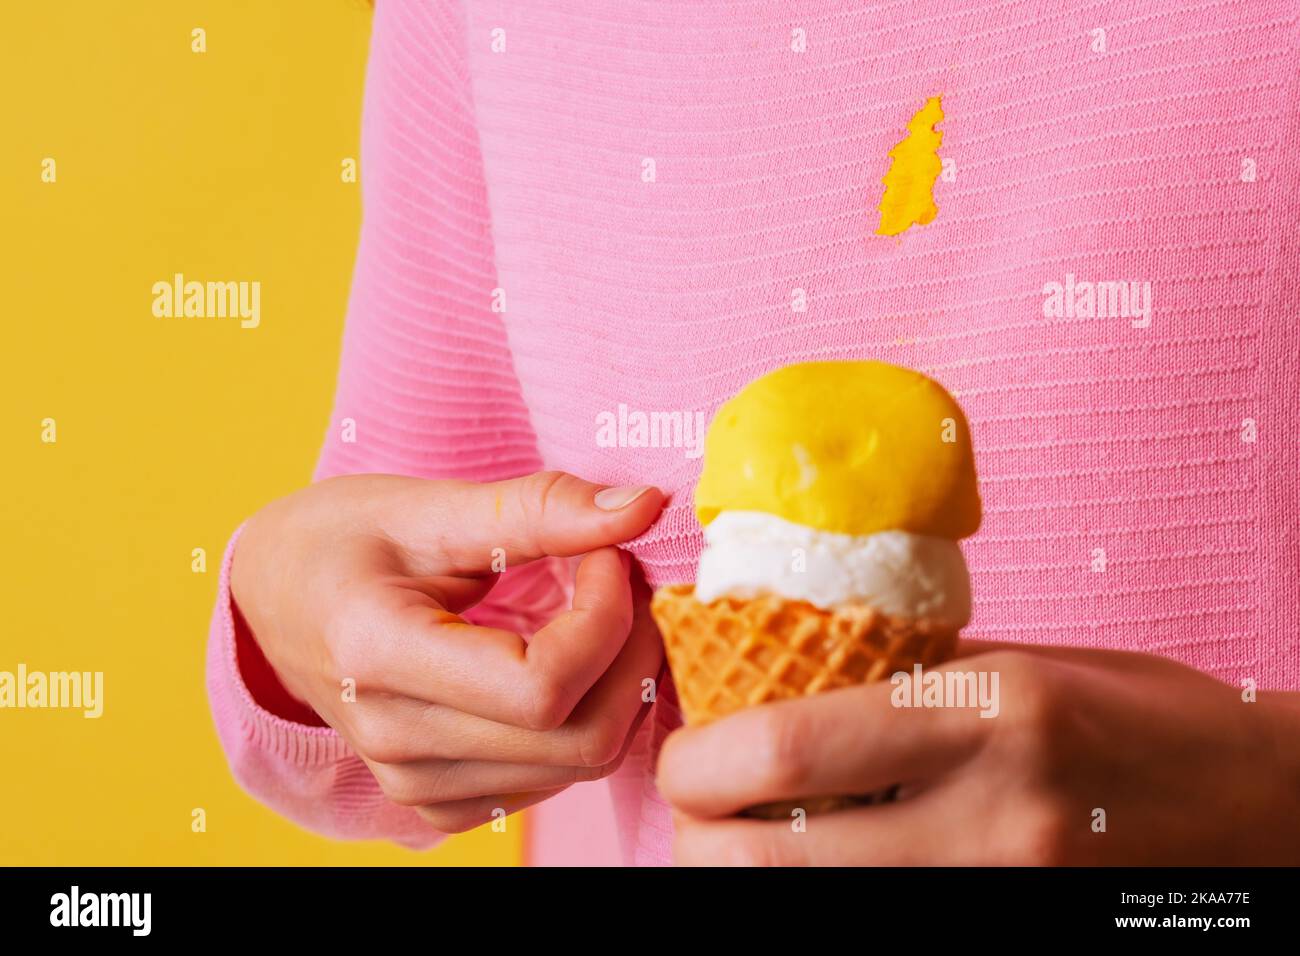 Female hand showing a dirty stain creamy banana ice cream on blouse. isolated. on a yellow background Stock Photo